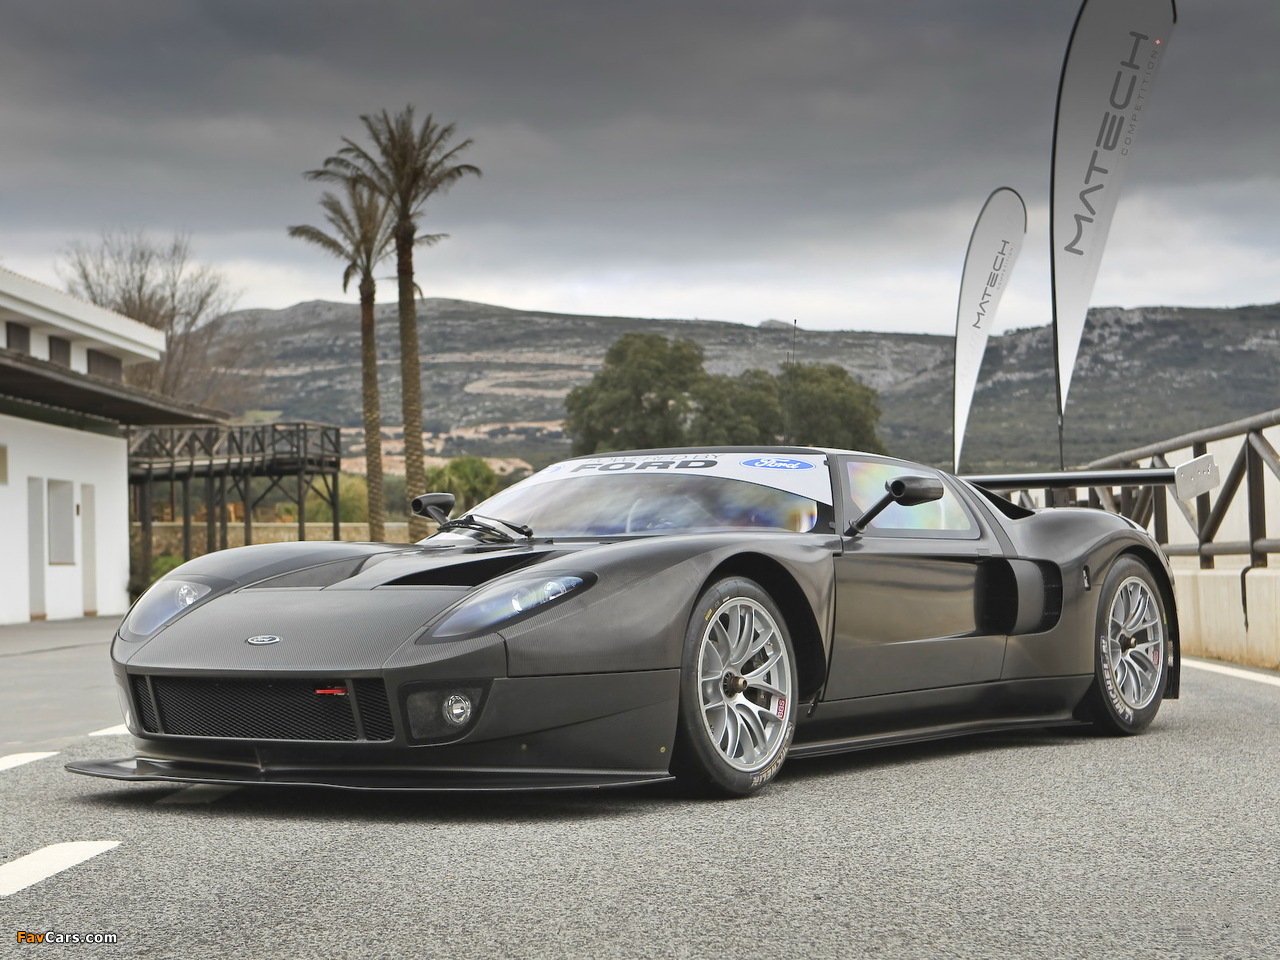 Images of Matech Racing Ford GT 2007 (1280 x 960)